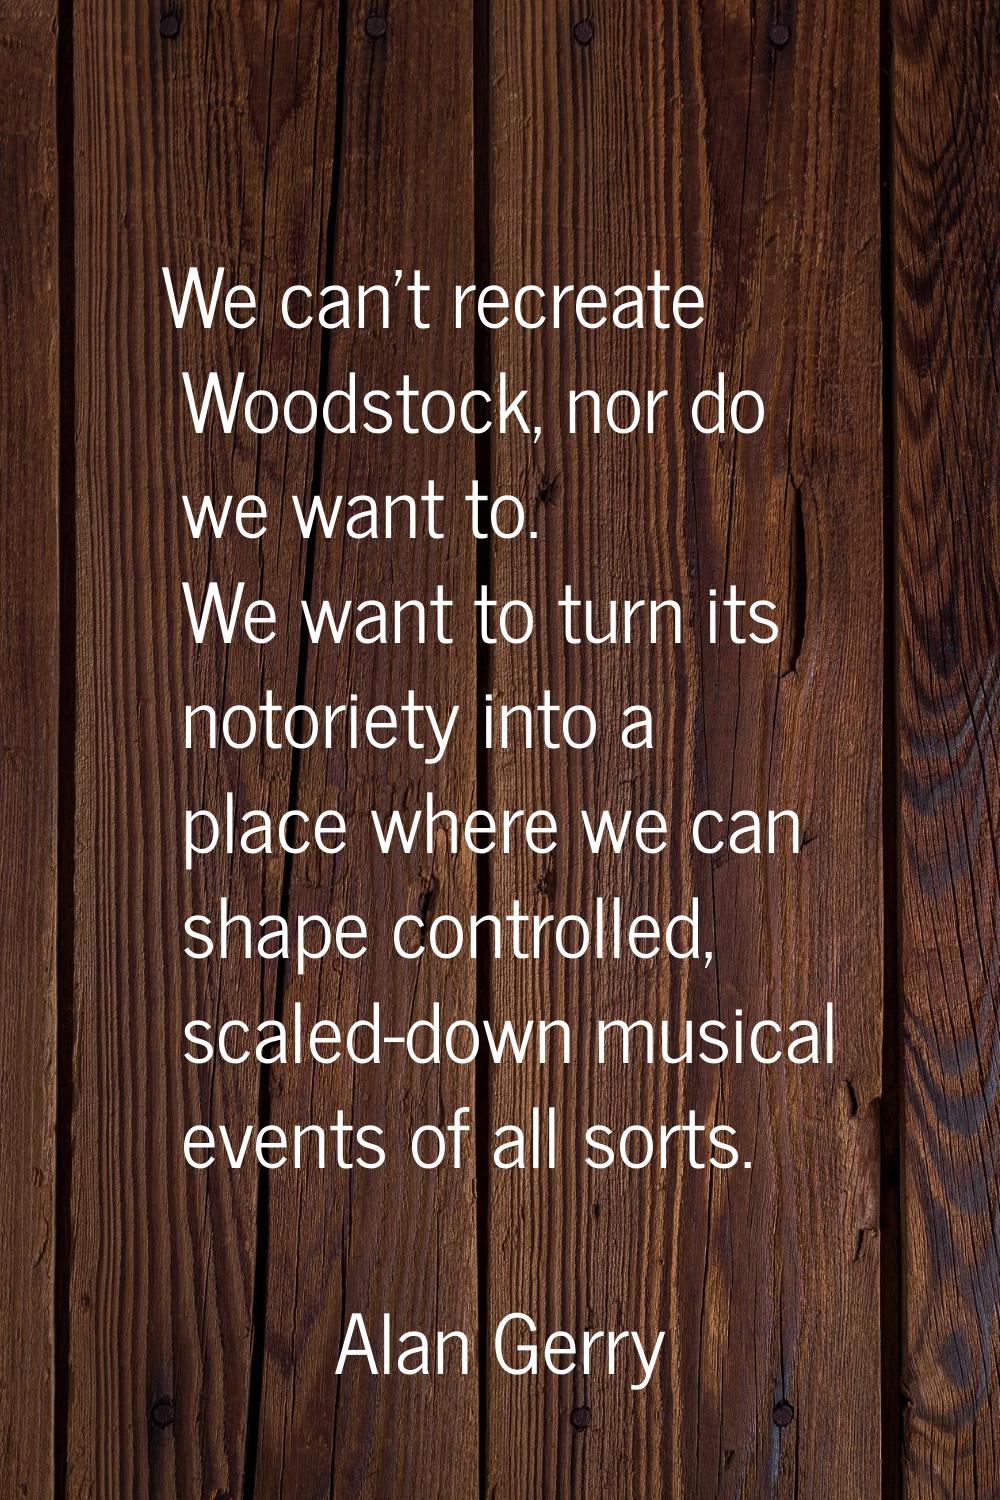 We can't recreate Woodstock, nor do we want to. We want to turn its notoriety into a place where we